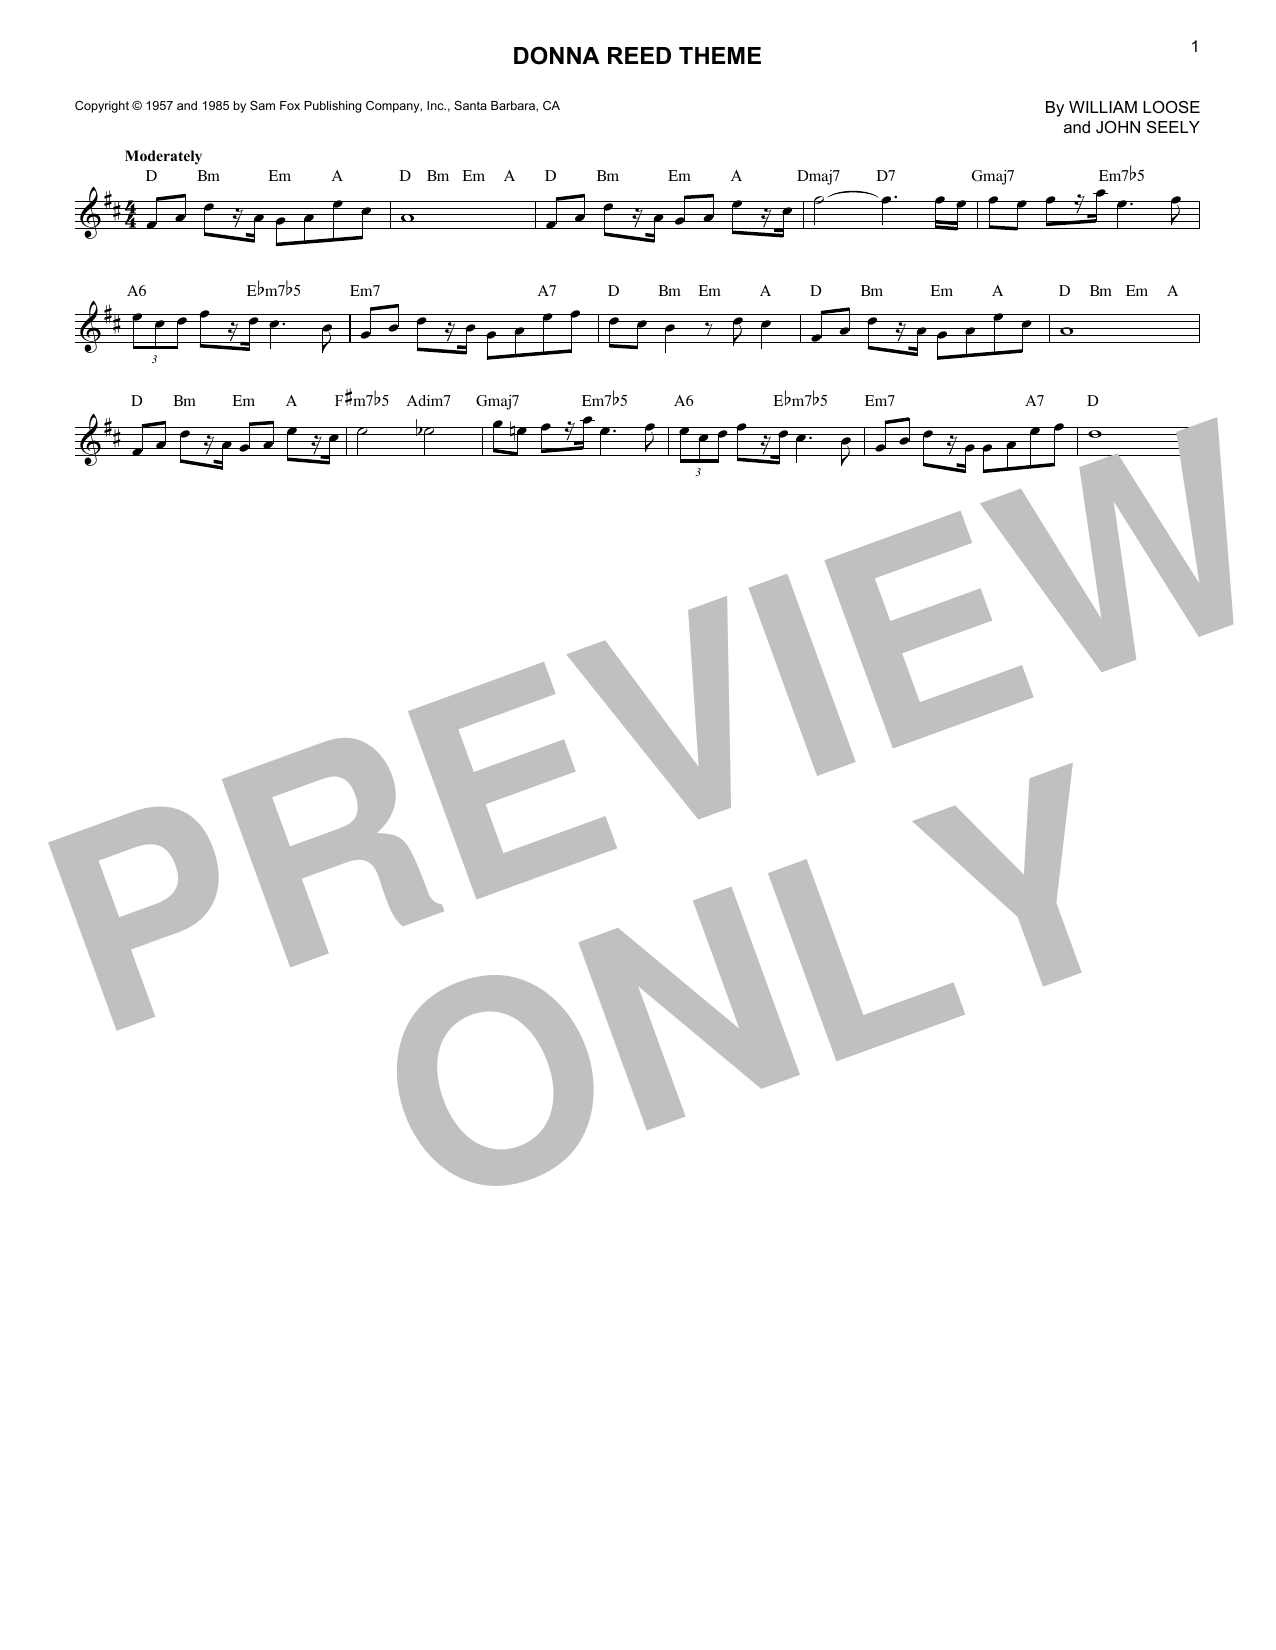 Download William Loose Donna Reed Theme Sheet Music